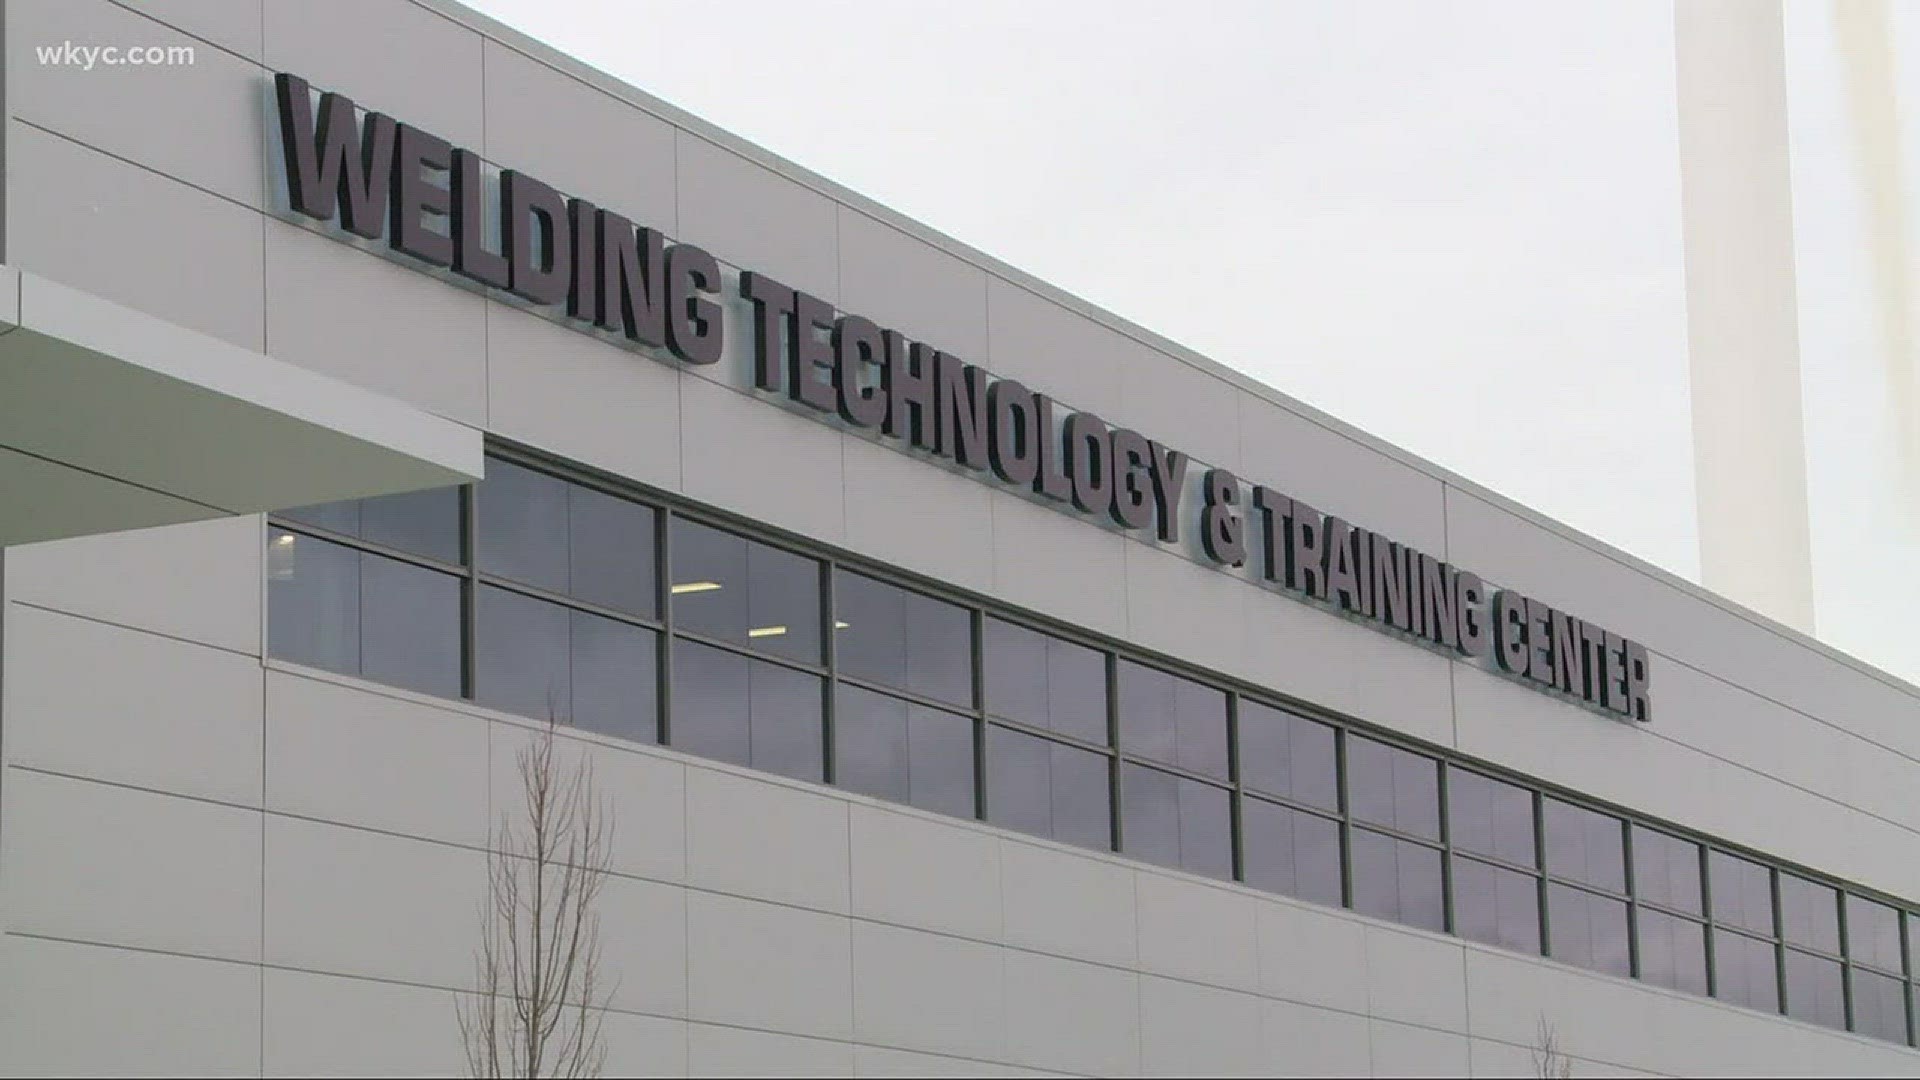 Lincoln Electric has grand opening of new technology and training center